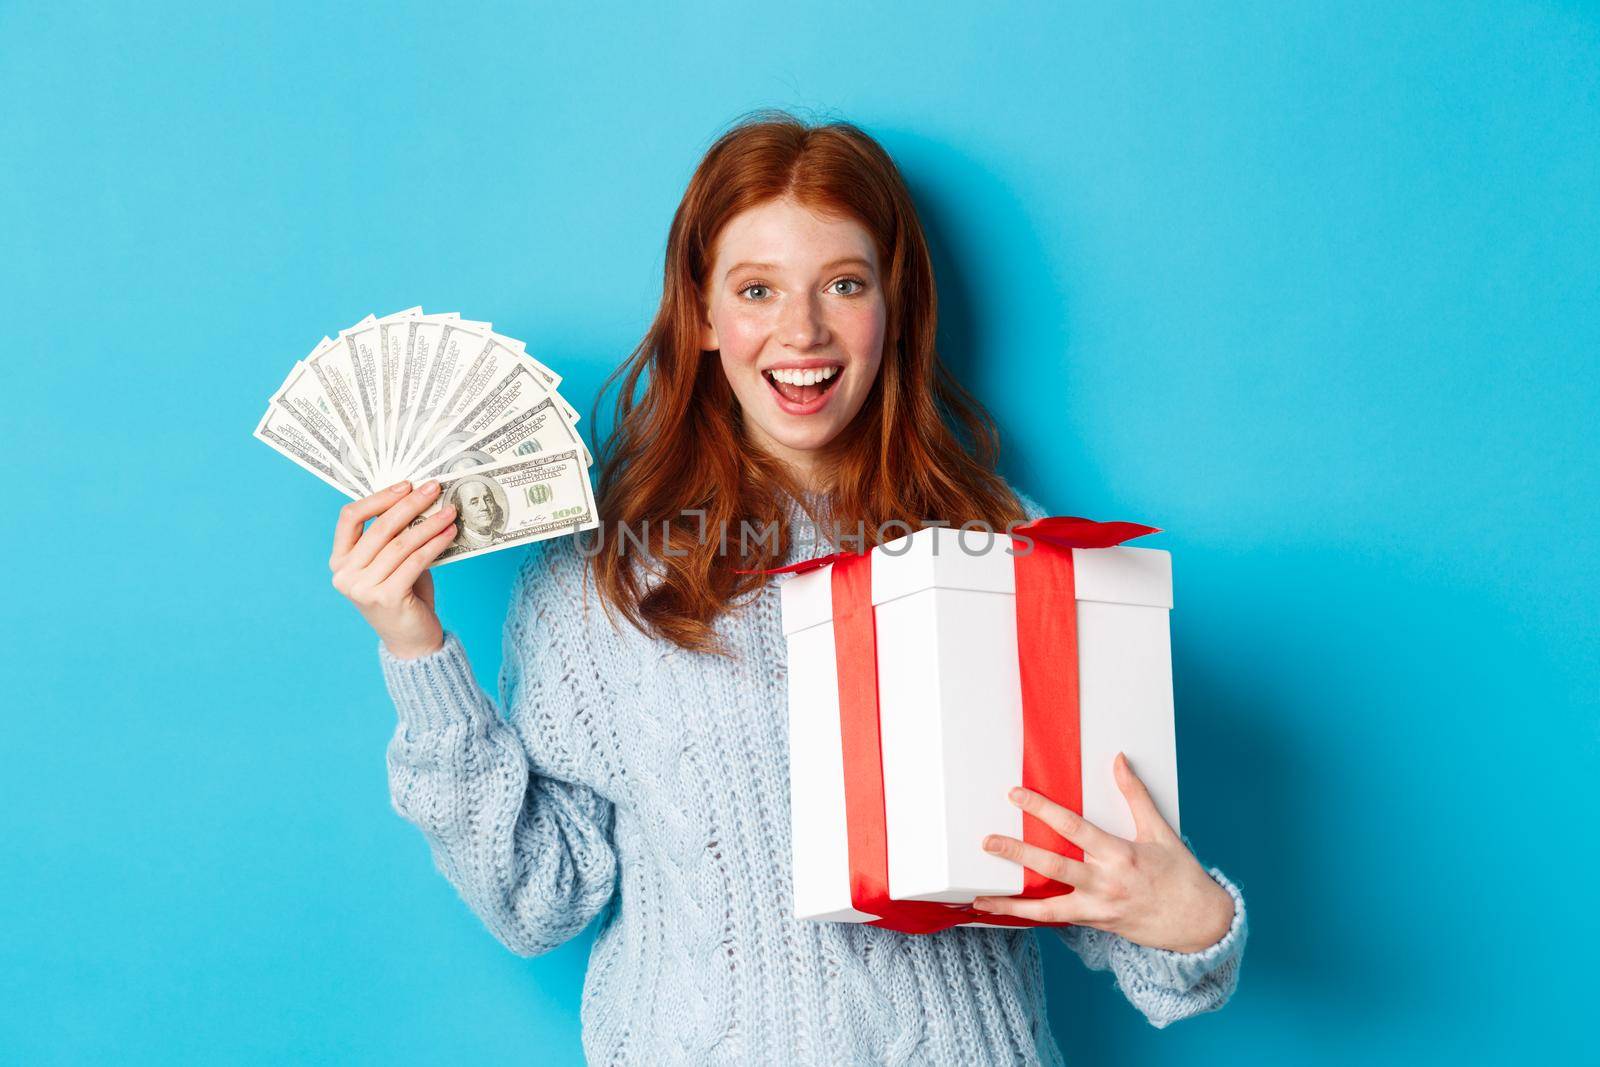 Christmas and shopping concept. Happy redhead woman holding money and big xmas present, showing dollars and gift, smiling pleased, standing over blue background.